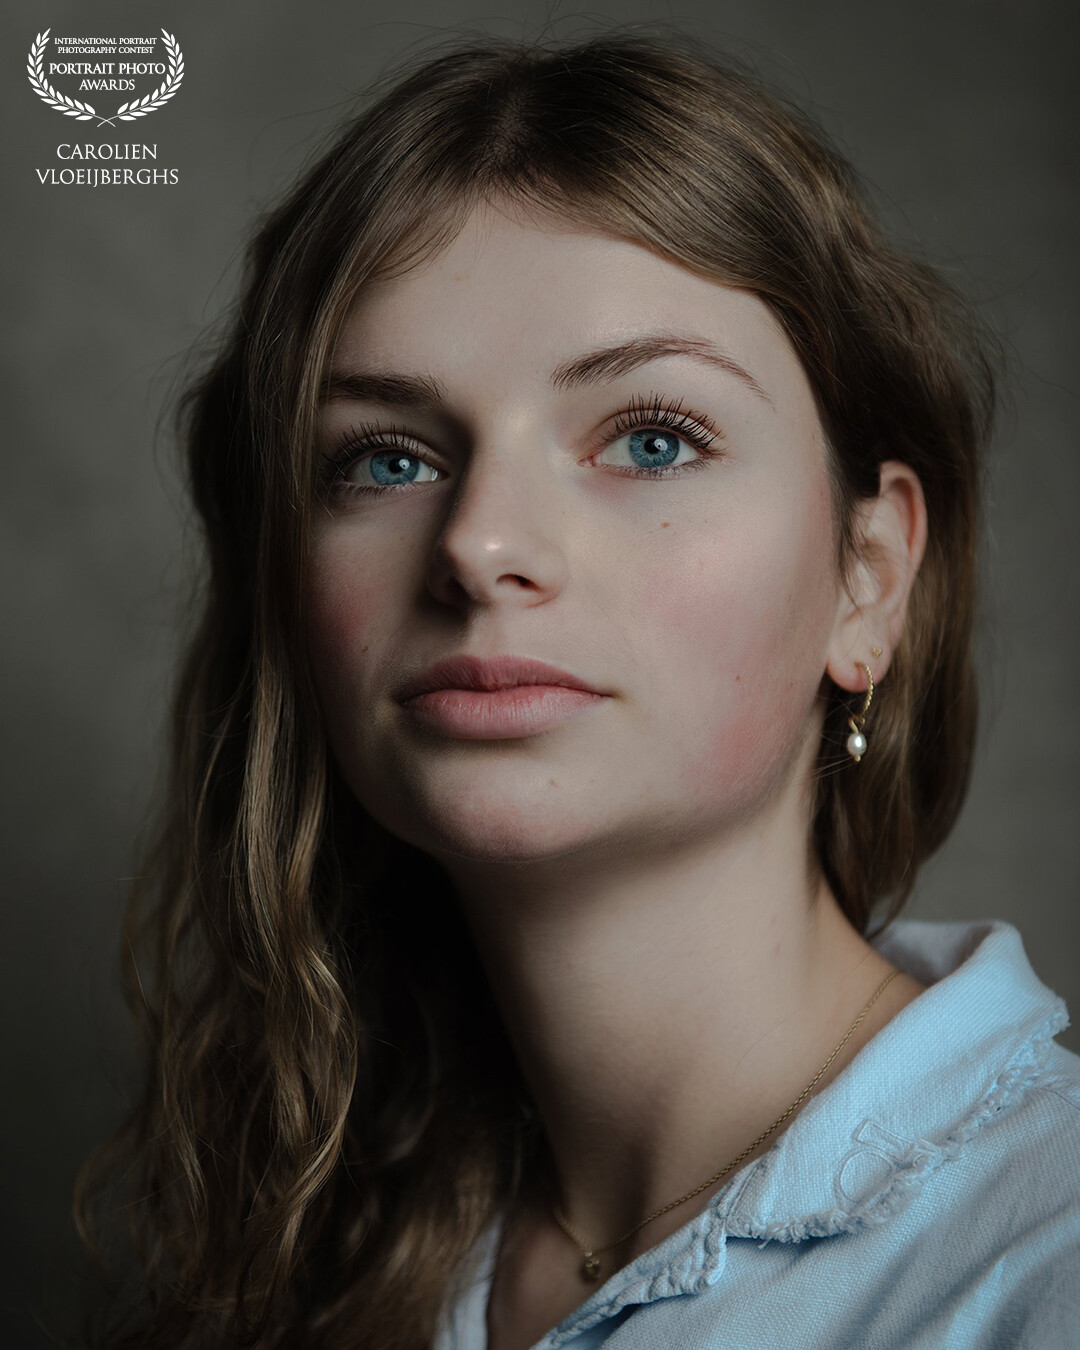 Portrait of a beautiful girl. Go to my website to see more of my work.